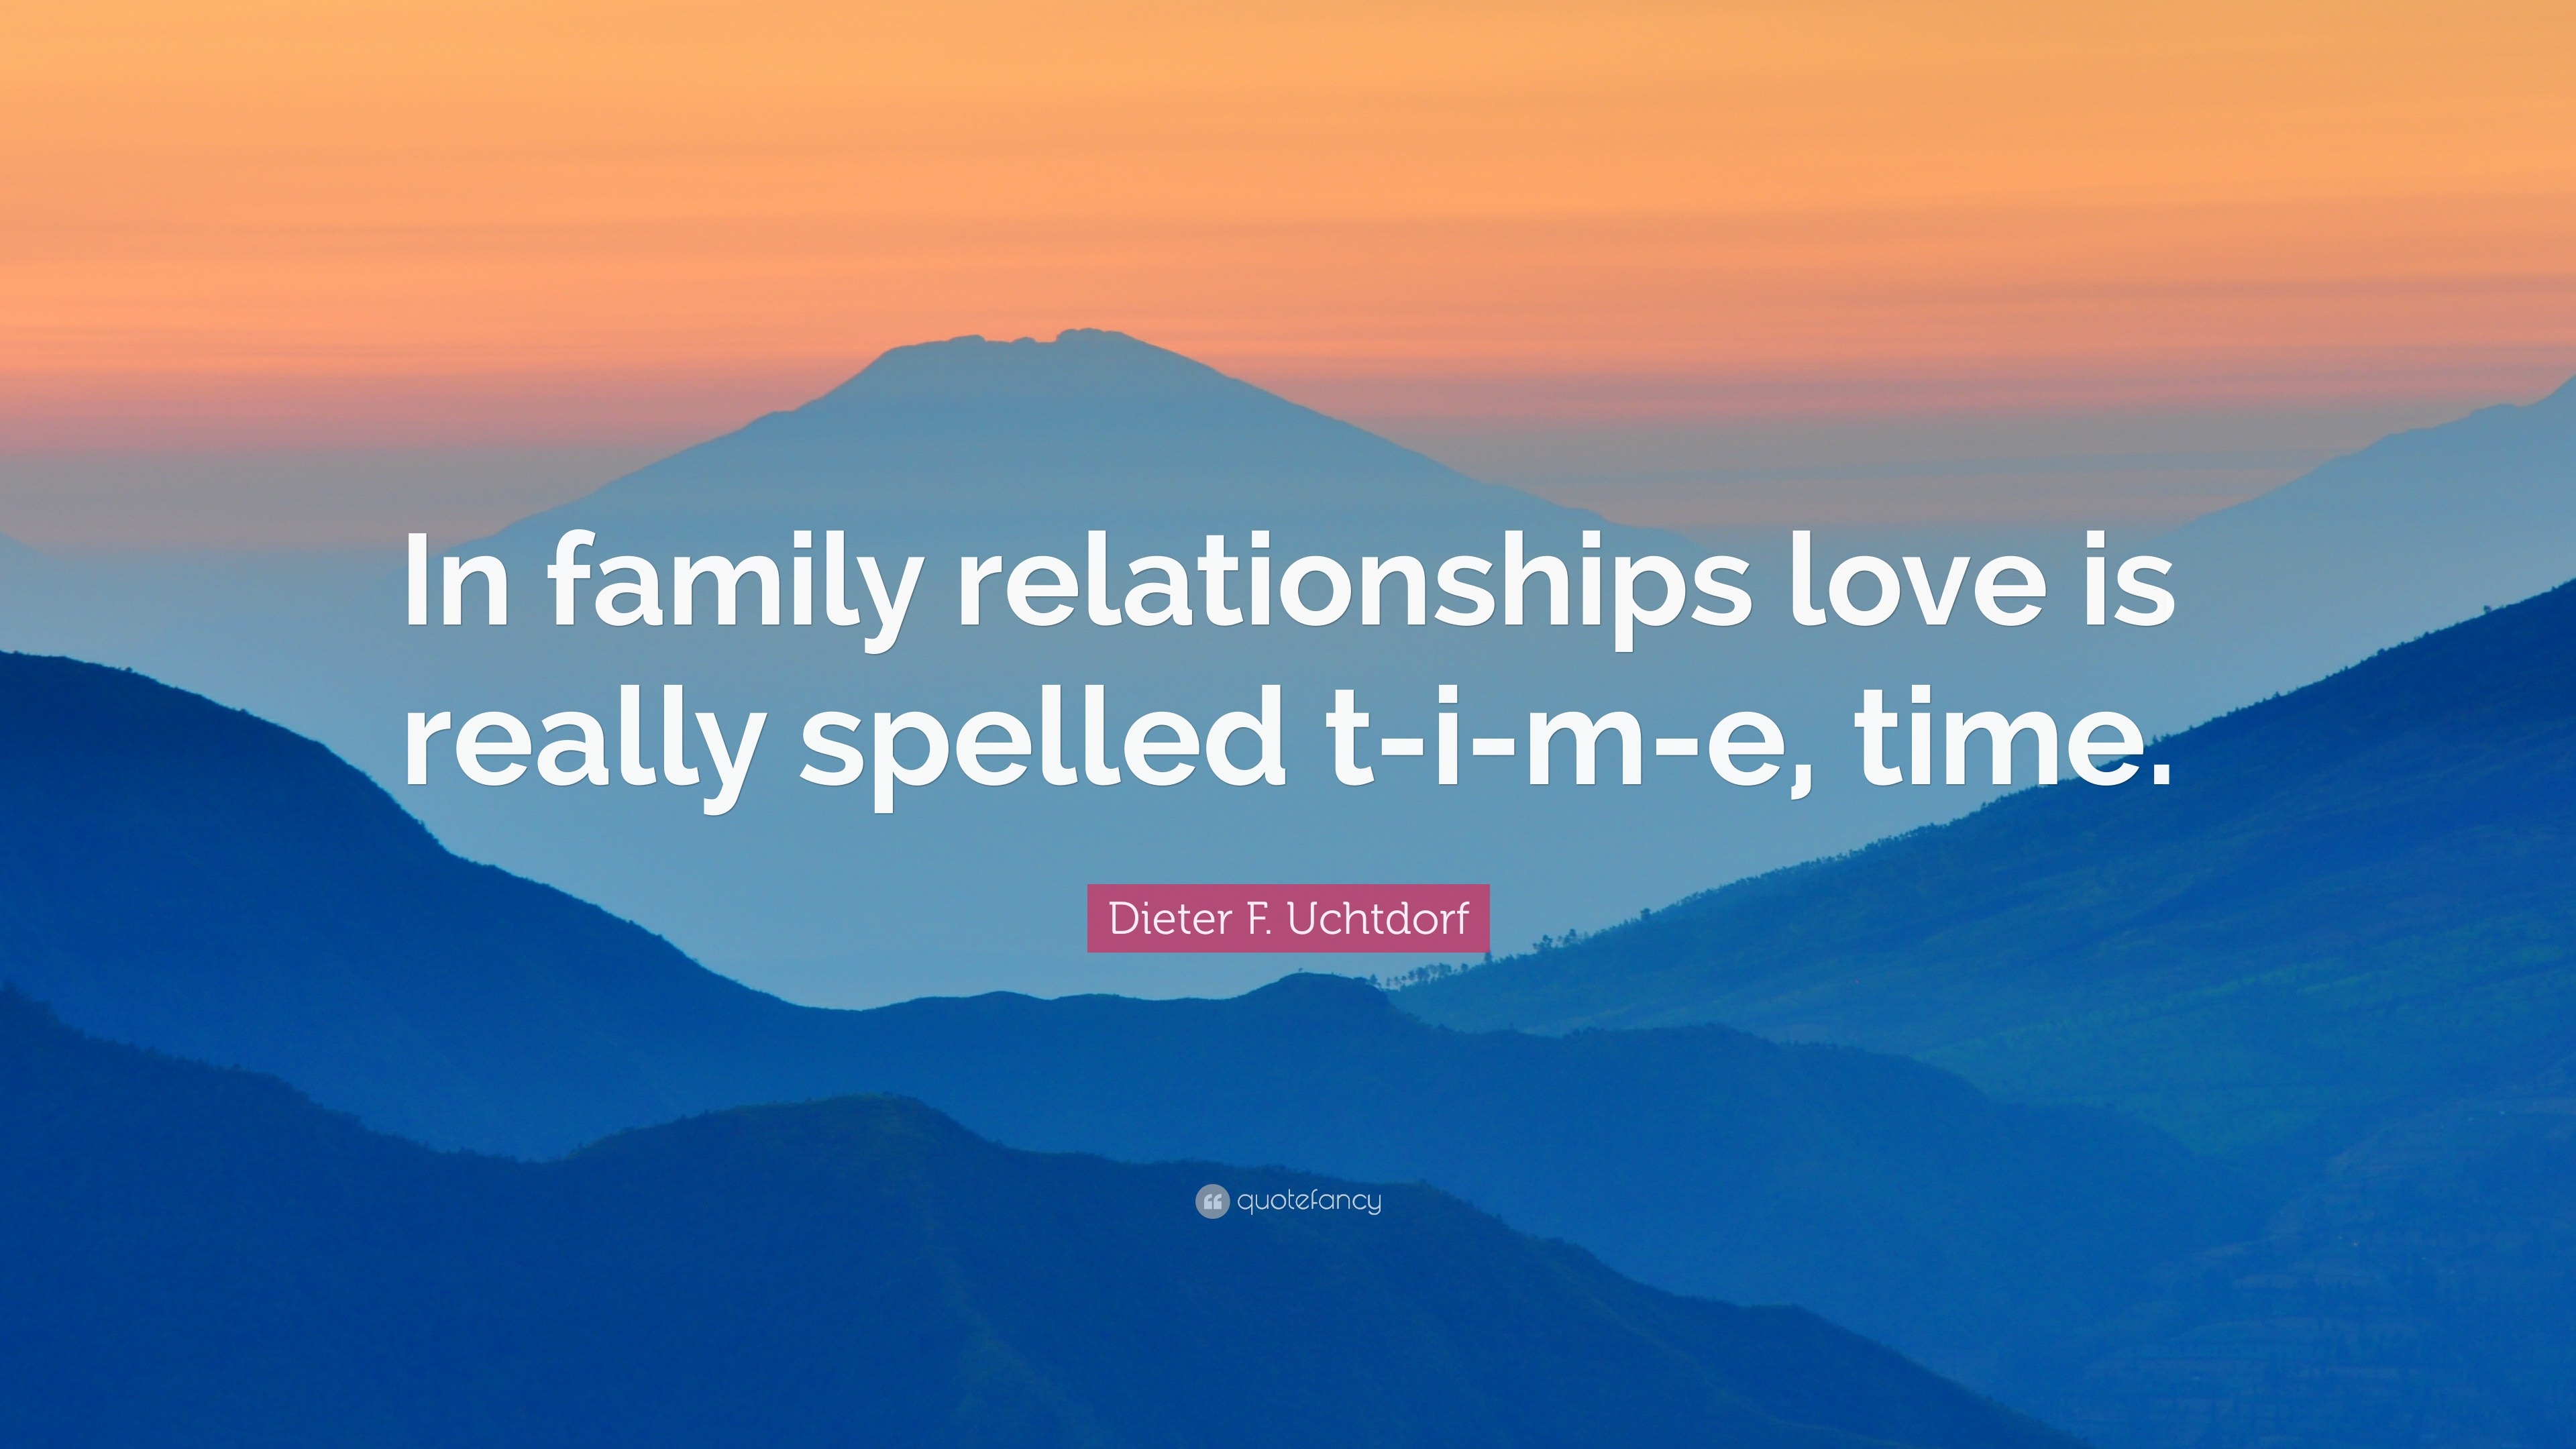 Dieter F Uchtdorf Quote “In family relationships love is really spelled t i m e